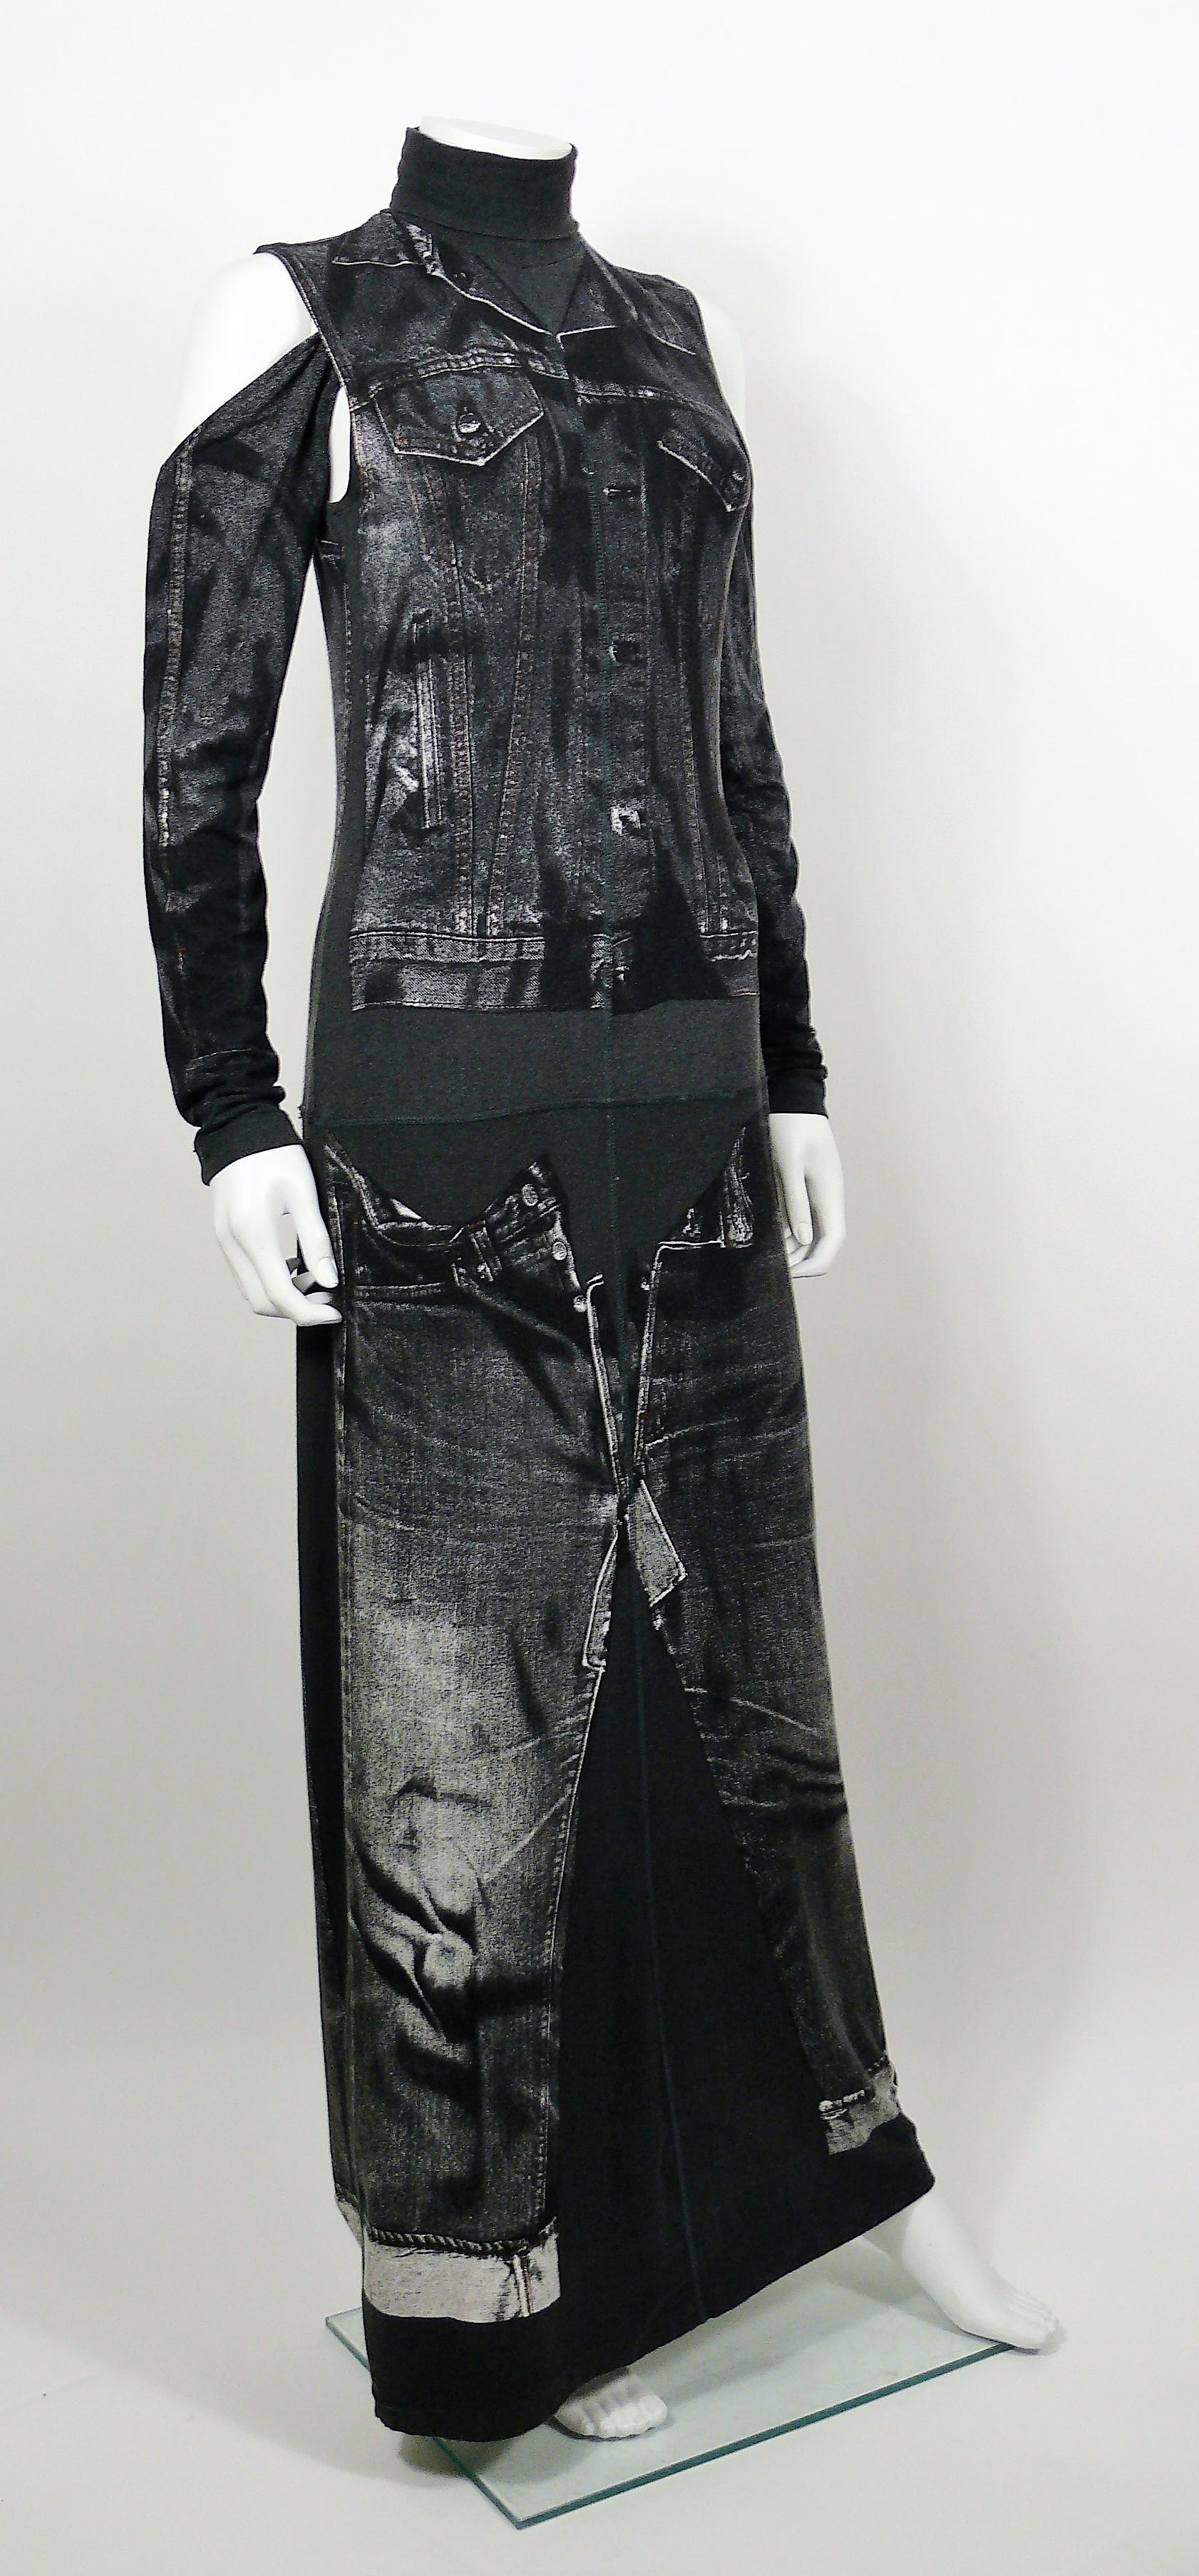 JEAN PAUL GAULTIER rare maxi jersey dress with detachable sleeves featuring an x-ray screen trompe l’œil jean jacket and jeans on the front and back.

This dress features :
- Grey jersey background featuring distressed black/white x-ray screen